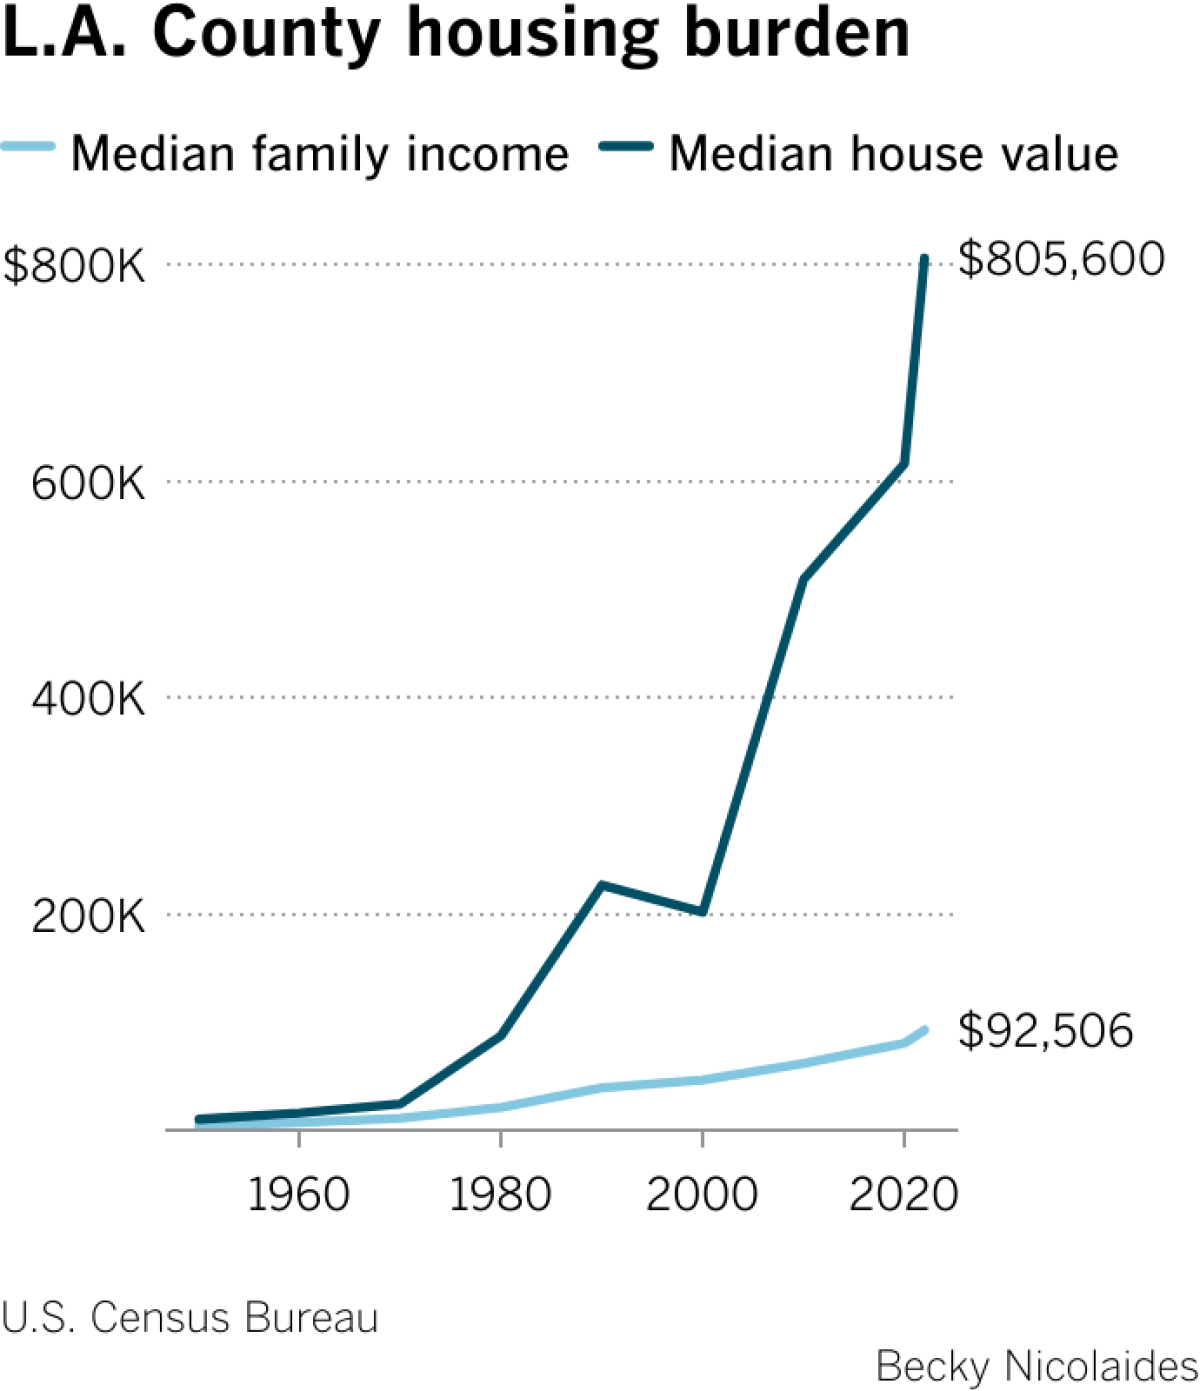 Line chart shows steep rise in median house value since 2000, while median family income remained relatively flat.